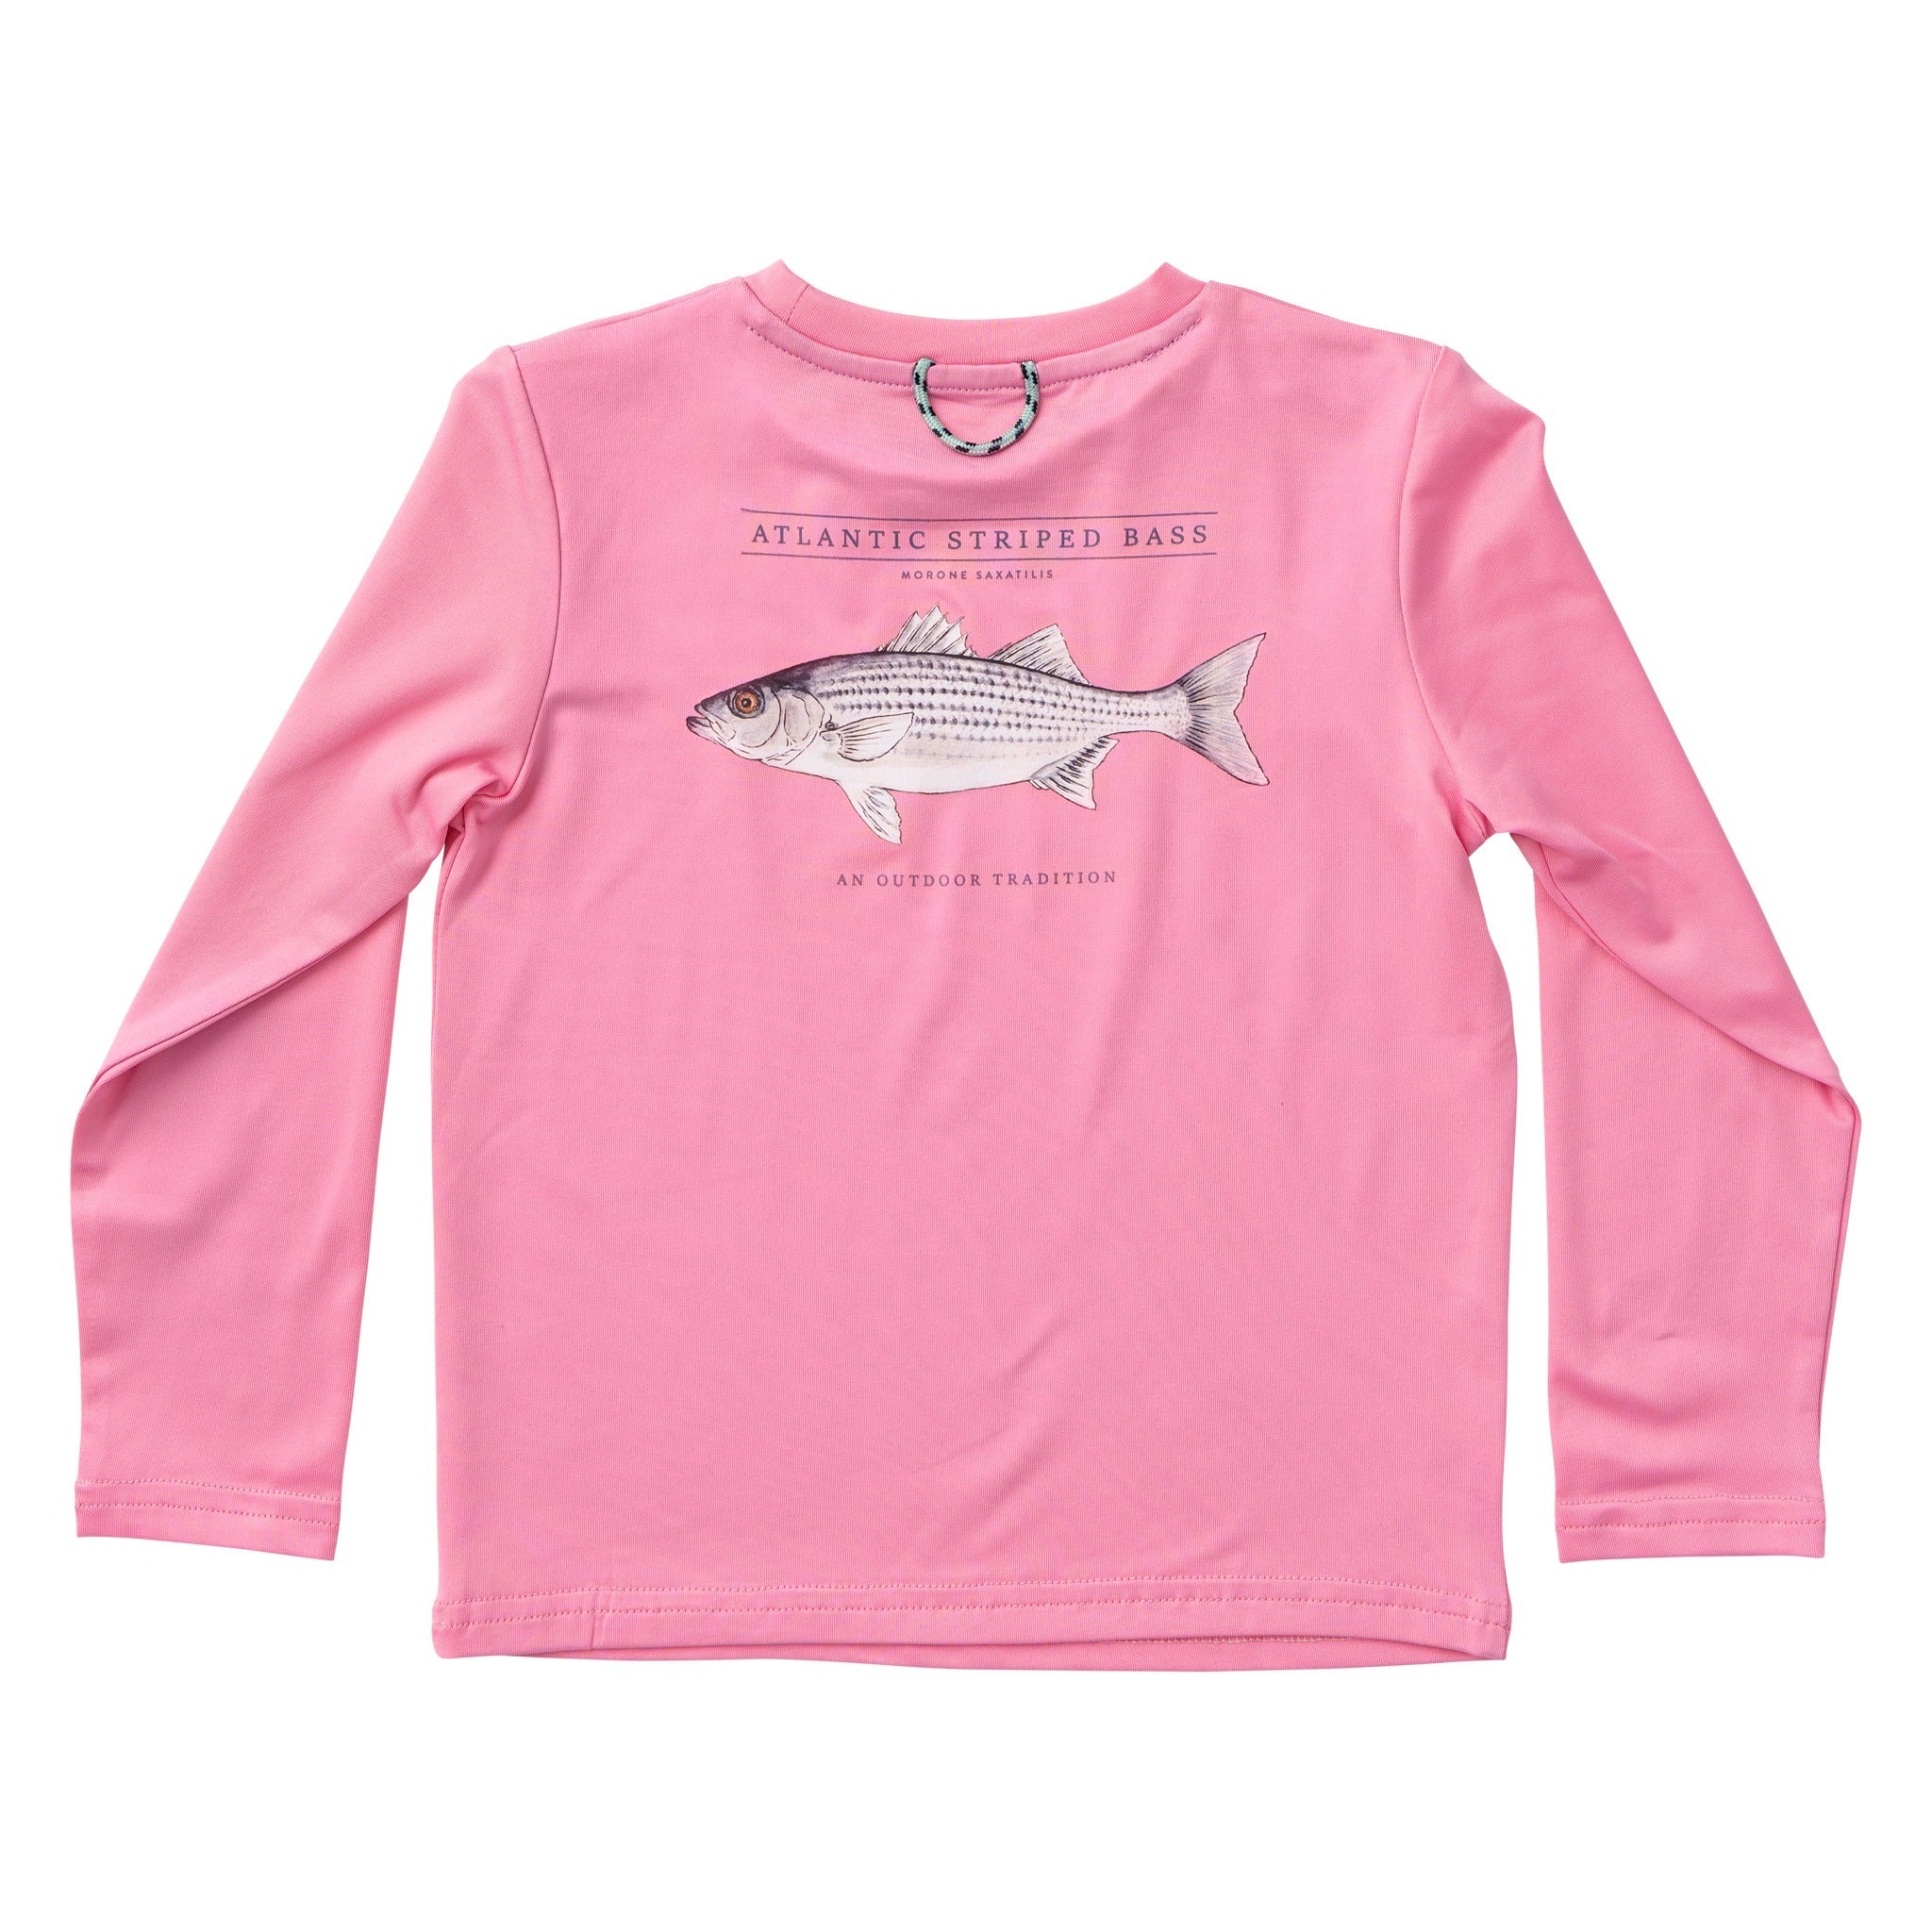 Pro Performance Tee - Pink Cosmos (2T-7/8)